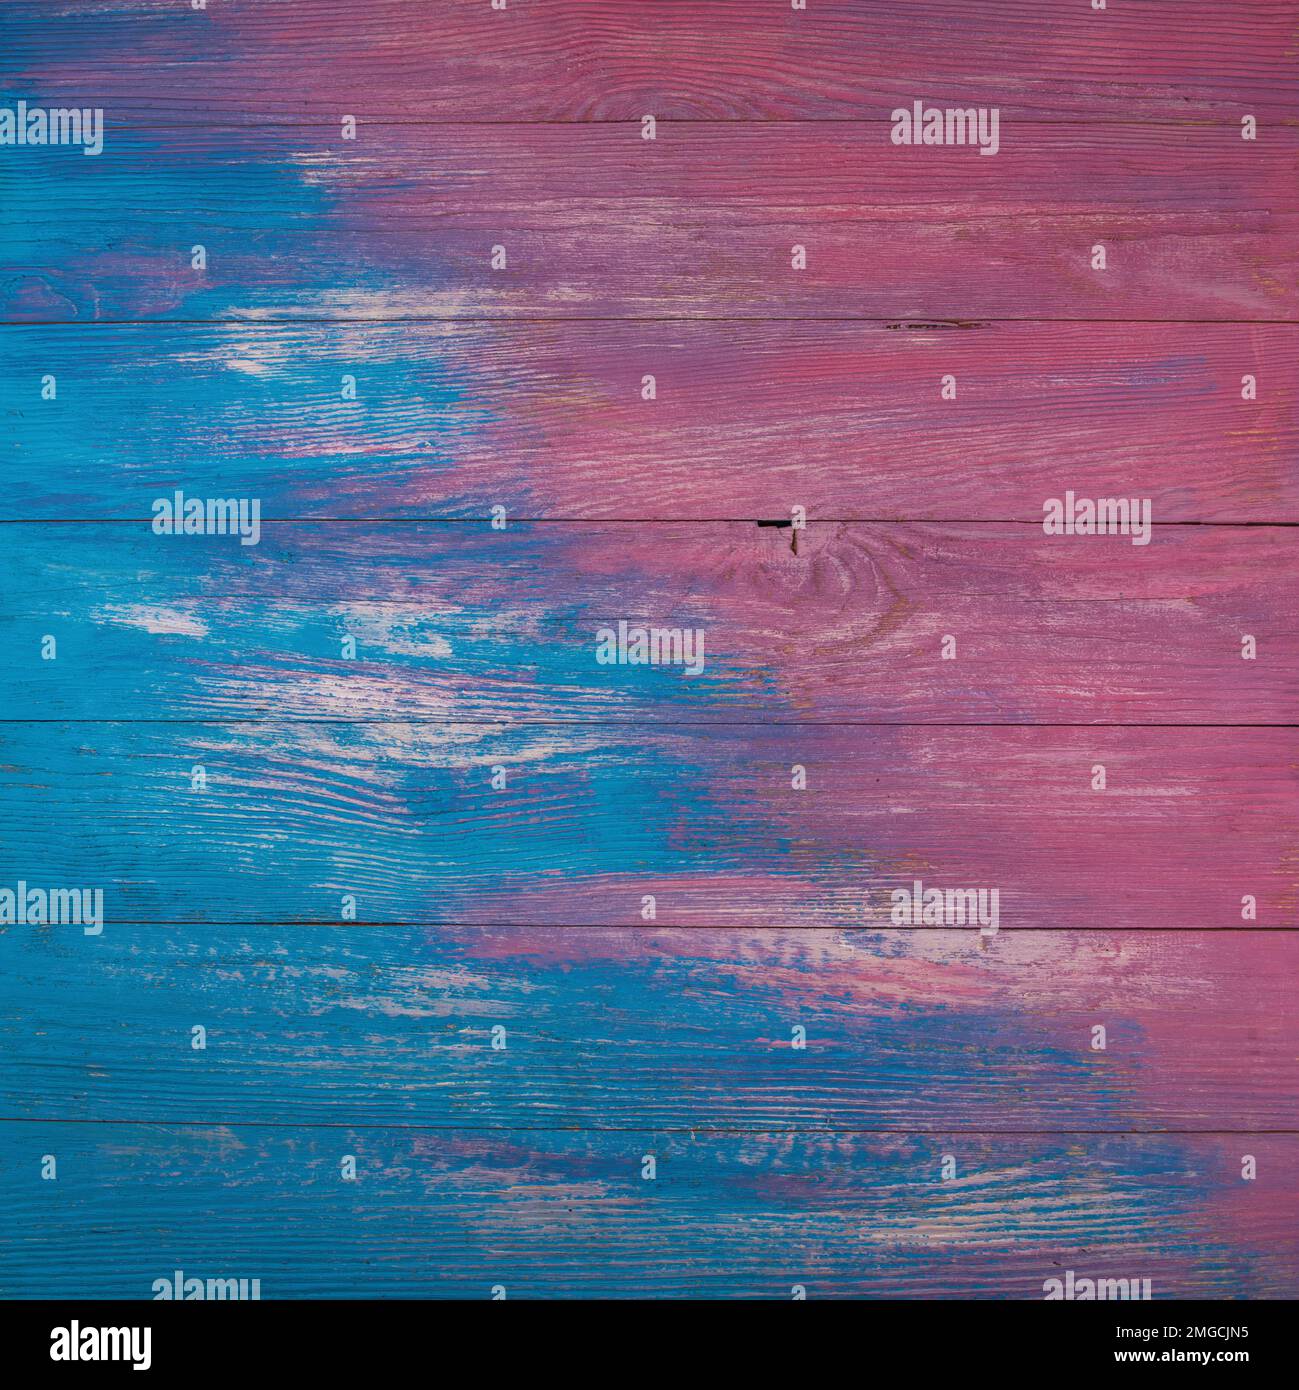 Vintage wooden blue and pink color background Stock Photo